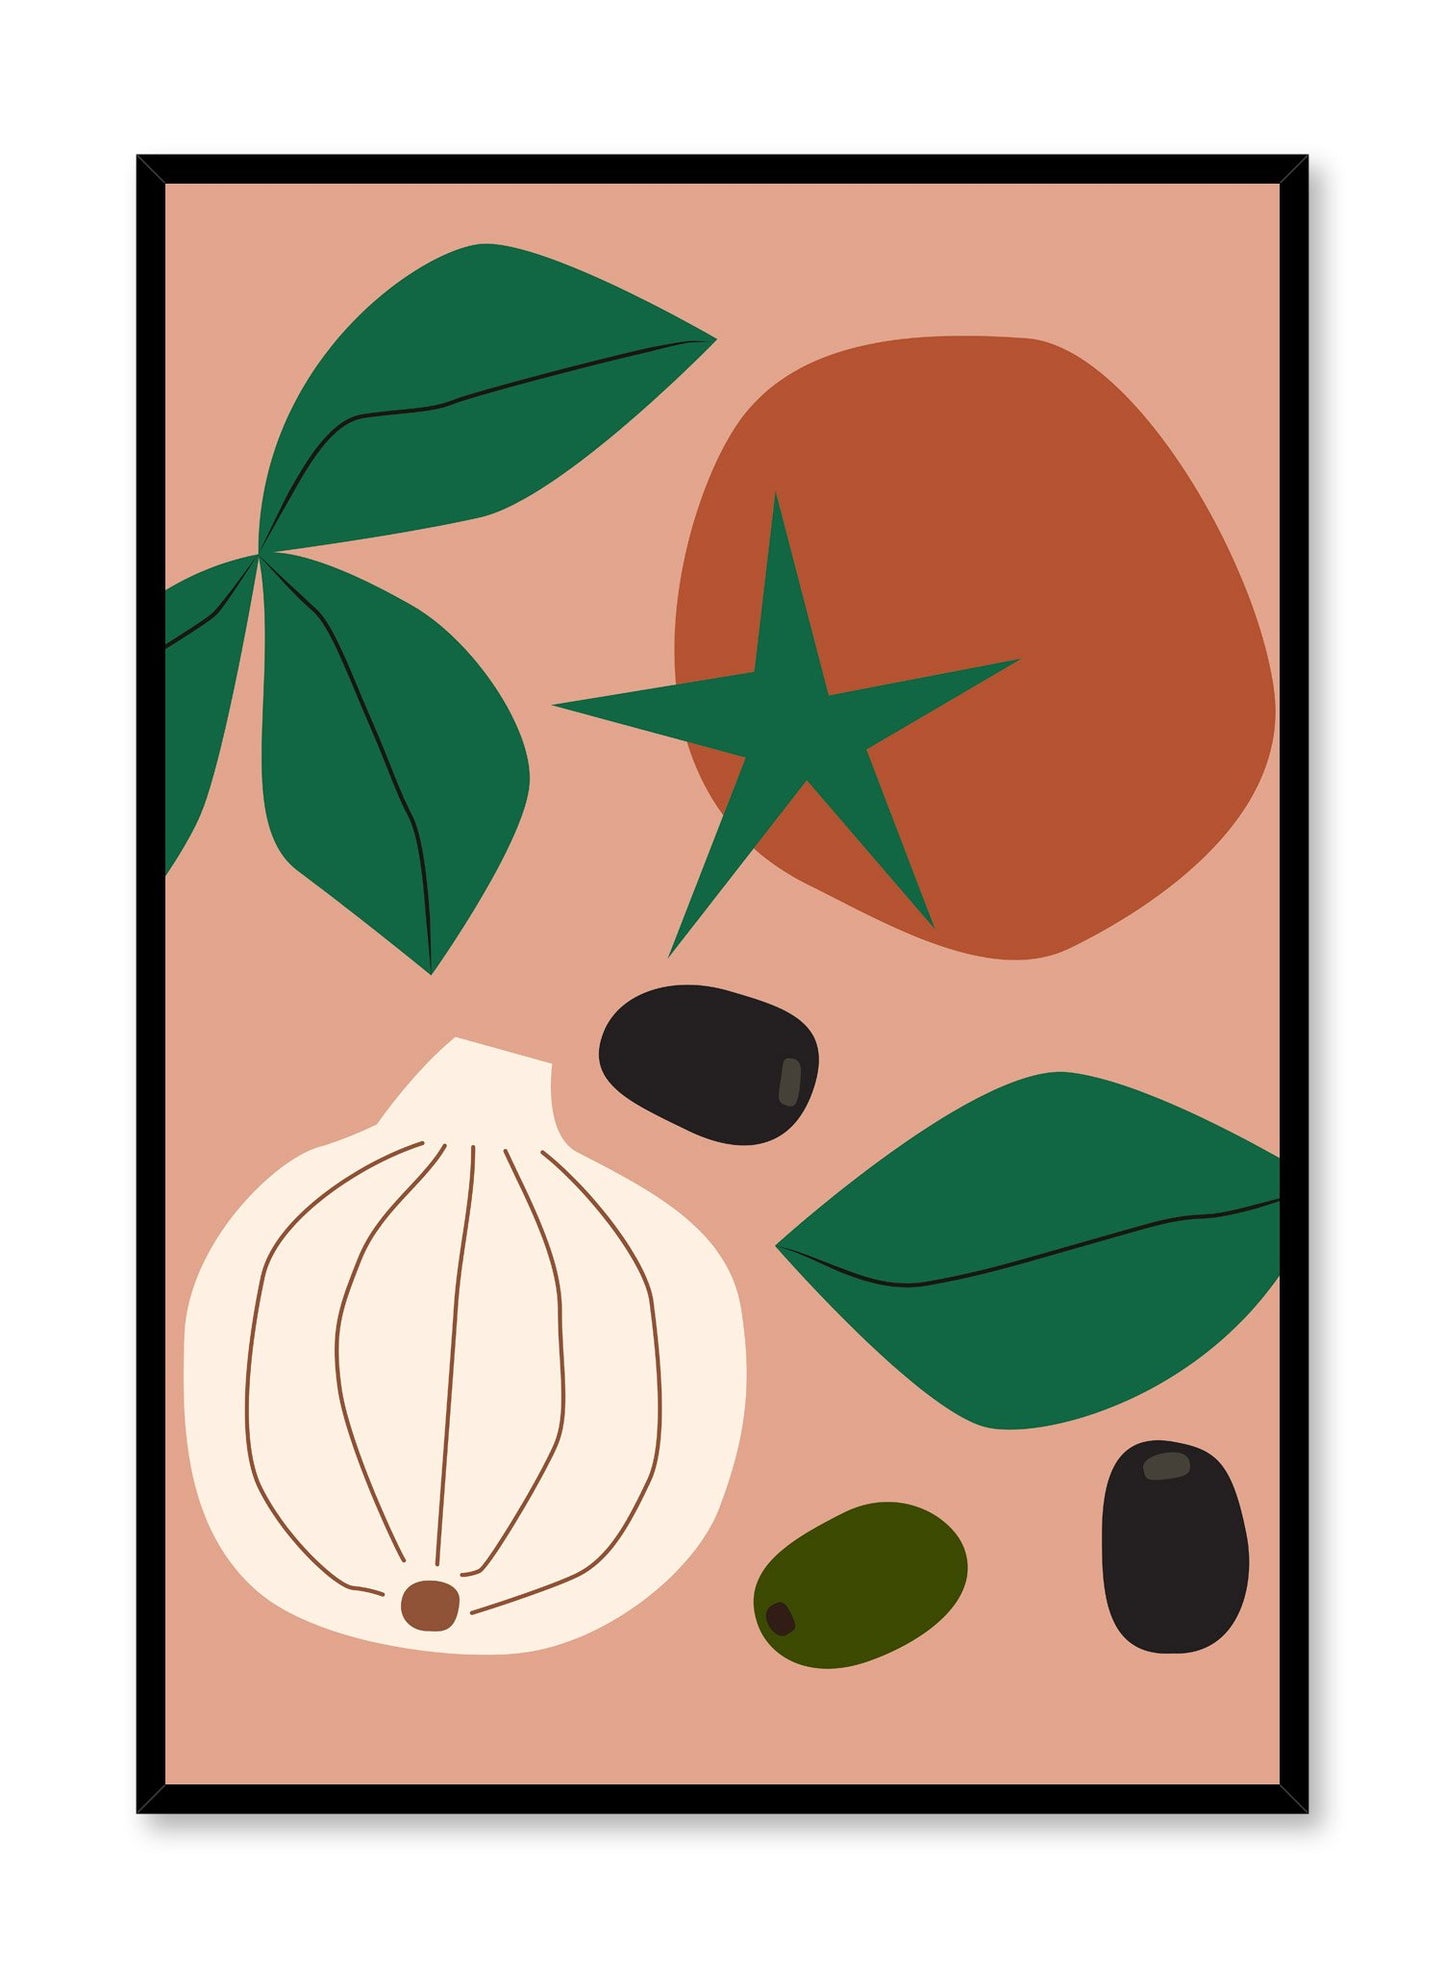 Mangia! is a tomato, basil, garlic and olive illustration poster by Opposite Wall. 